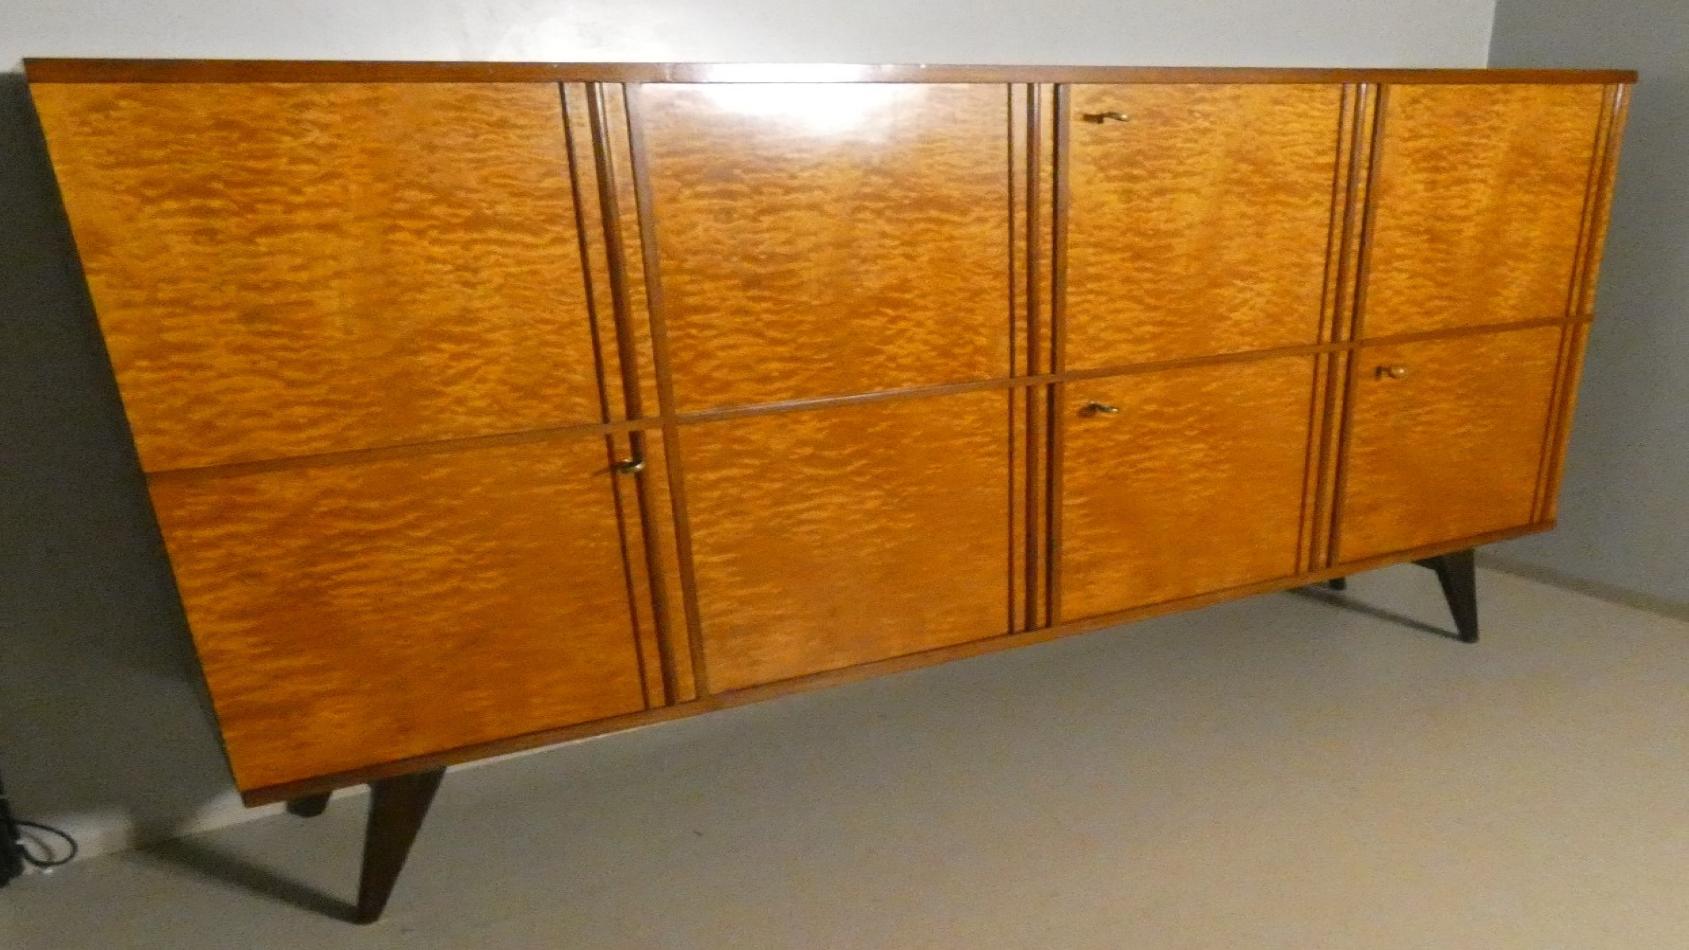 Large sideboard made of solid Teak wood, handcrafted in the 1970s in Italy. An extremely storage furniture, the sideboard also has 4 drawers with steel handles. Looking at the sideboard from the front, there is a single full-height hinged door with